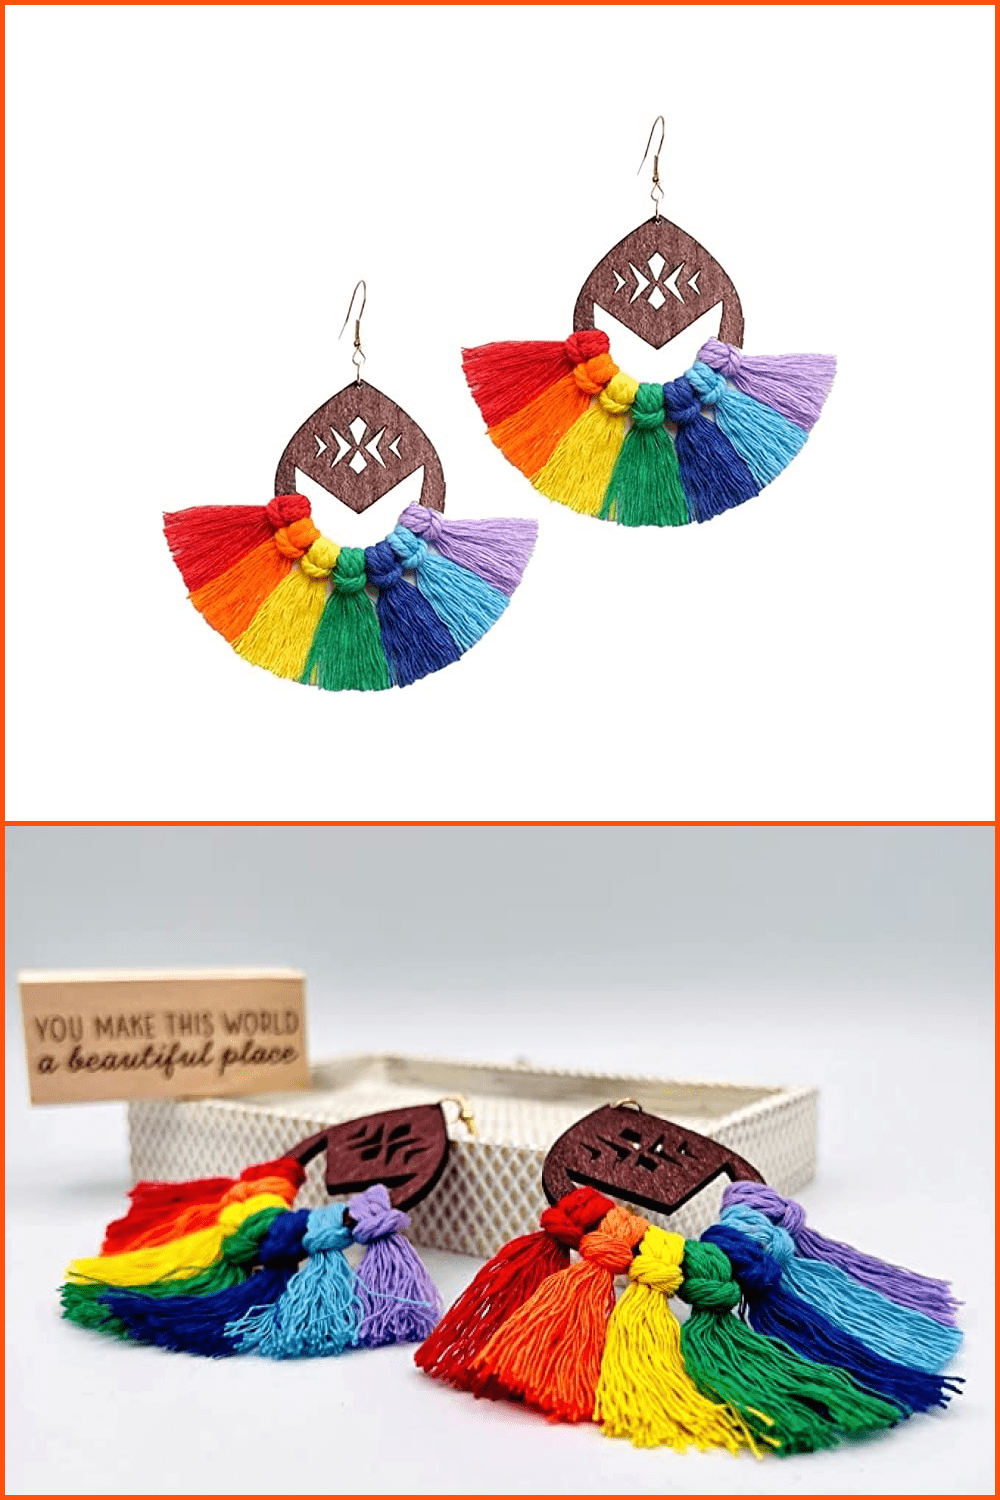 Earrings with weaving in the colors of the rainbow.